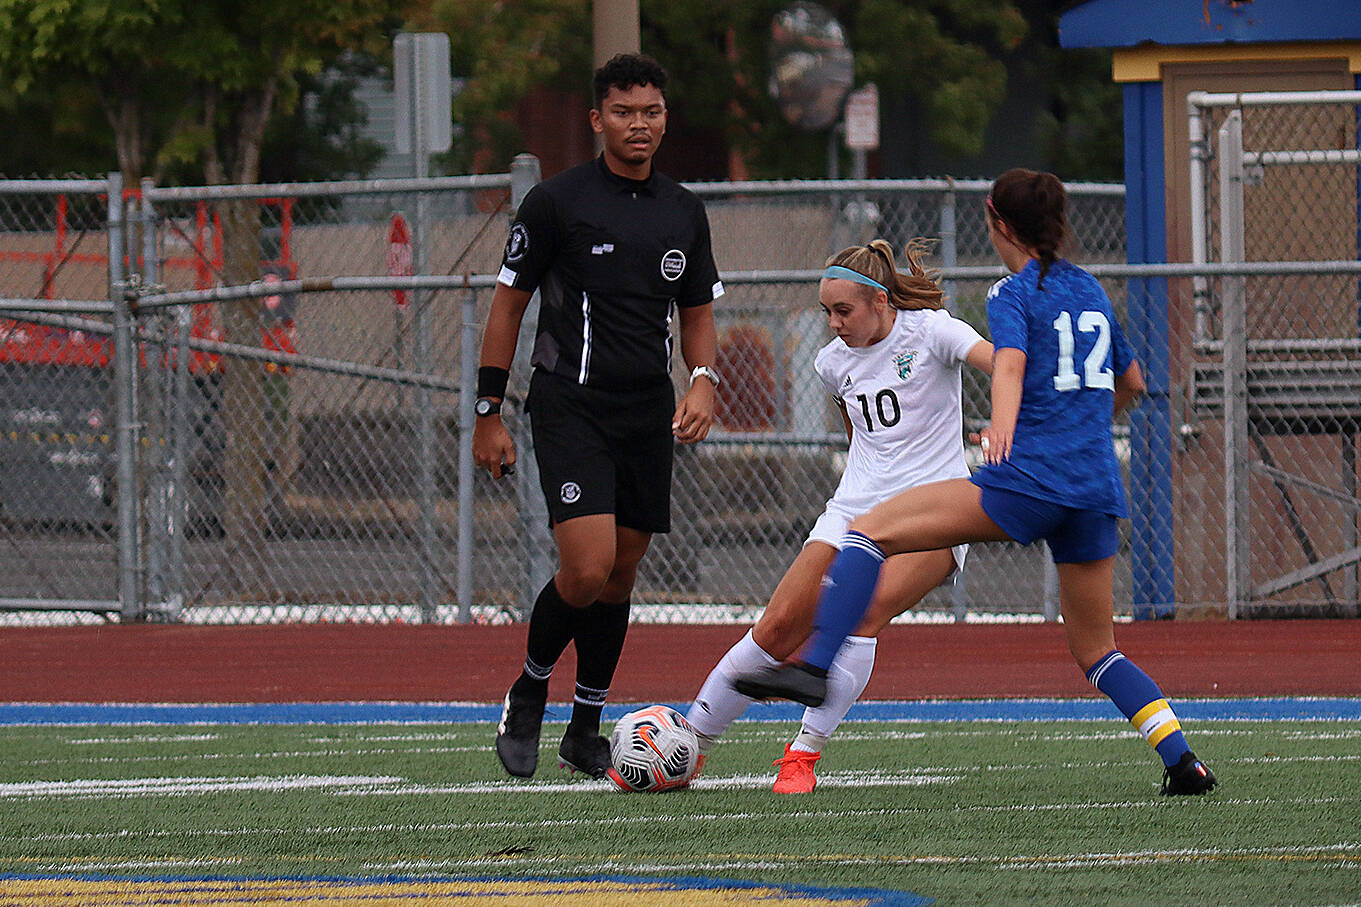 Panther striker Anne Anderson attempts to get back the Fife Trojan’s defense. Photo courtesy Andy Orozco